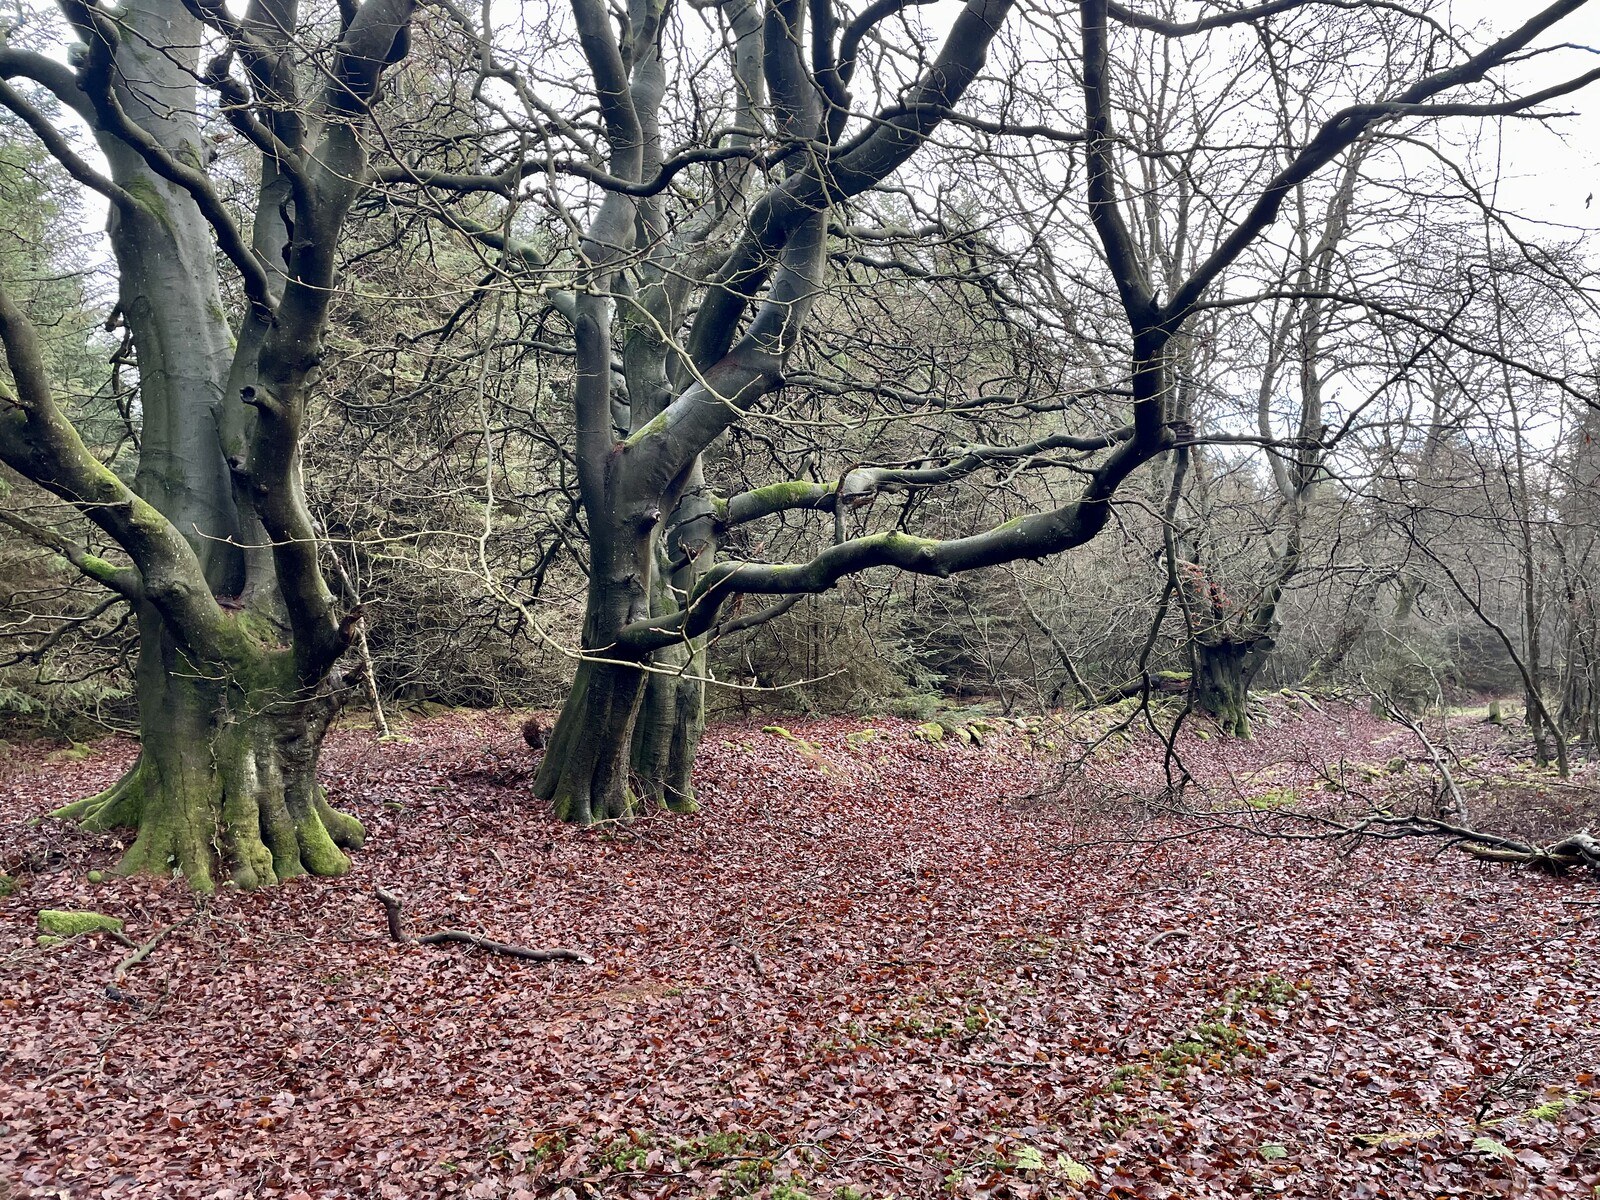 A trio of gnarled ash (?) trees in a small clearing, the ground totally covered in dead leaves